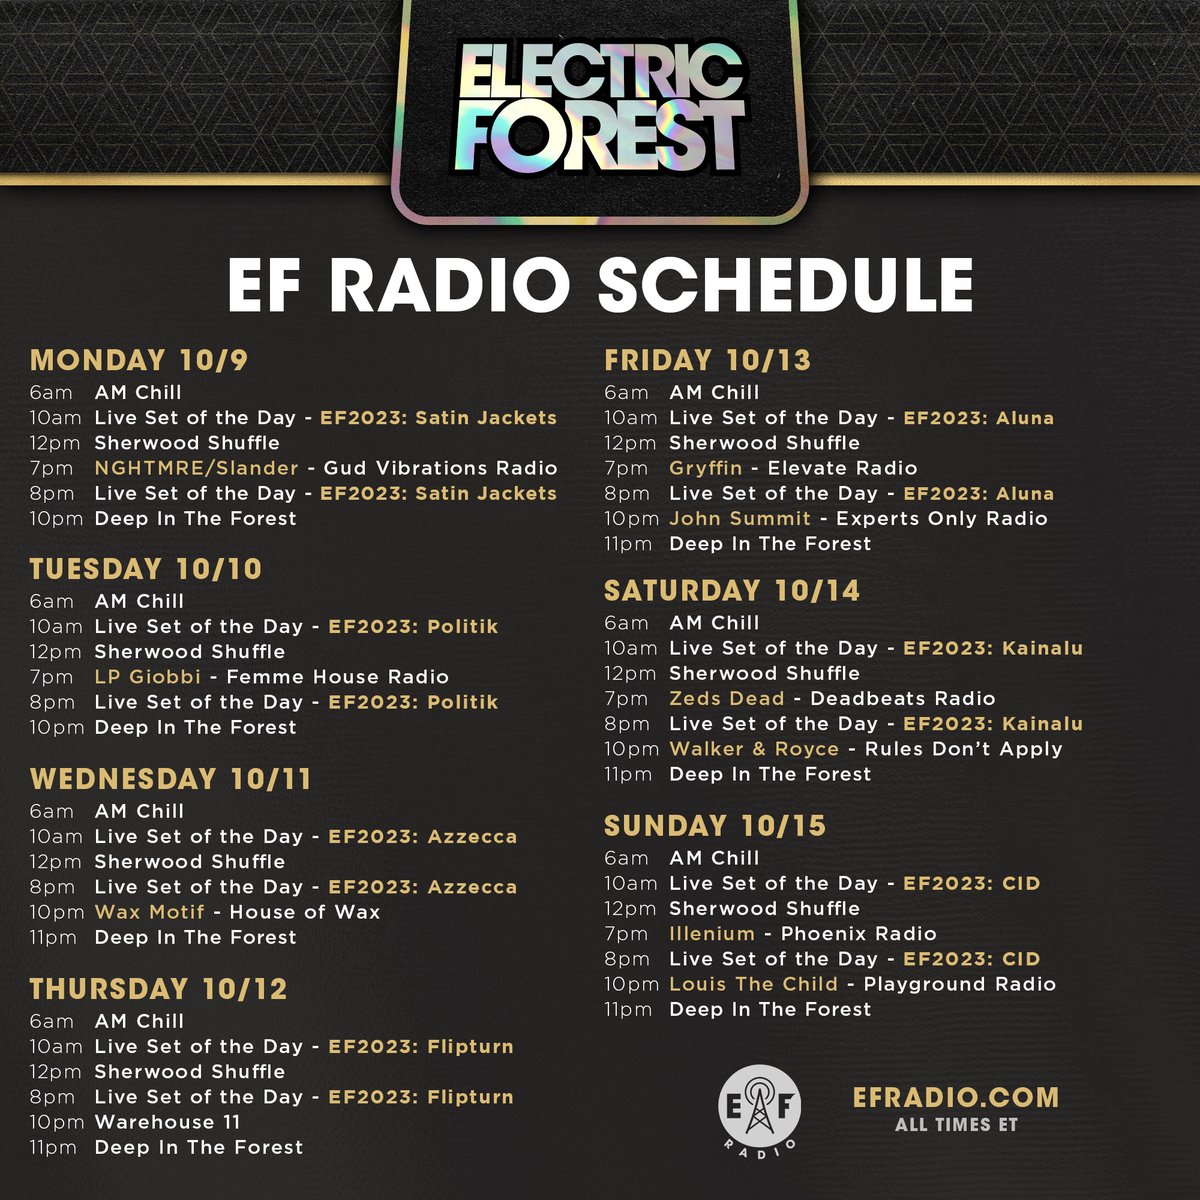 Synlig Avenue segment Electric Forest ⚡🌲 on X: "This week on @EForestRadio! 📻🌲 Tune in for  #EF2023 performances from @flipturnband and others, daily broadcasts of the  AM Chill and Sherwood Shuffle, programming from @zedsdead, and